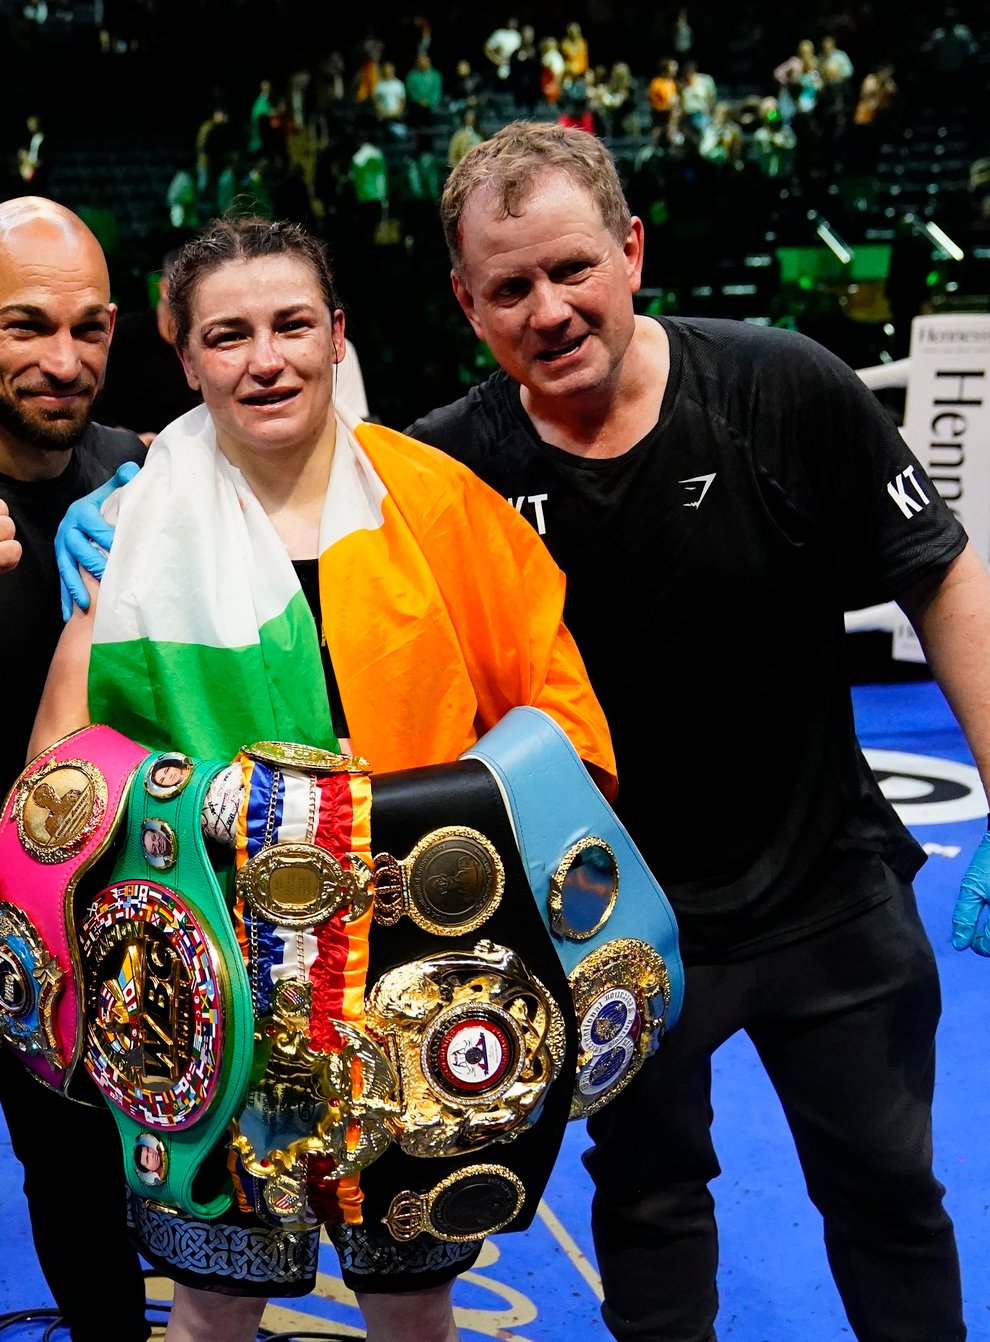 Katie Taylor, centre, is still the undisputed lightweight champion (Frank Franklin II/AP/PA)